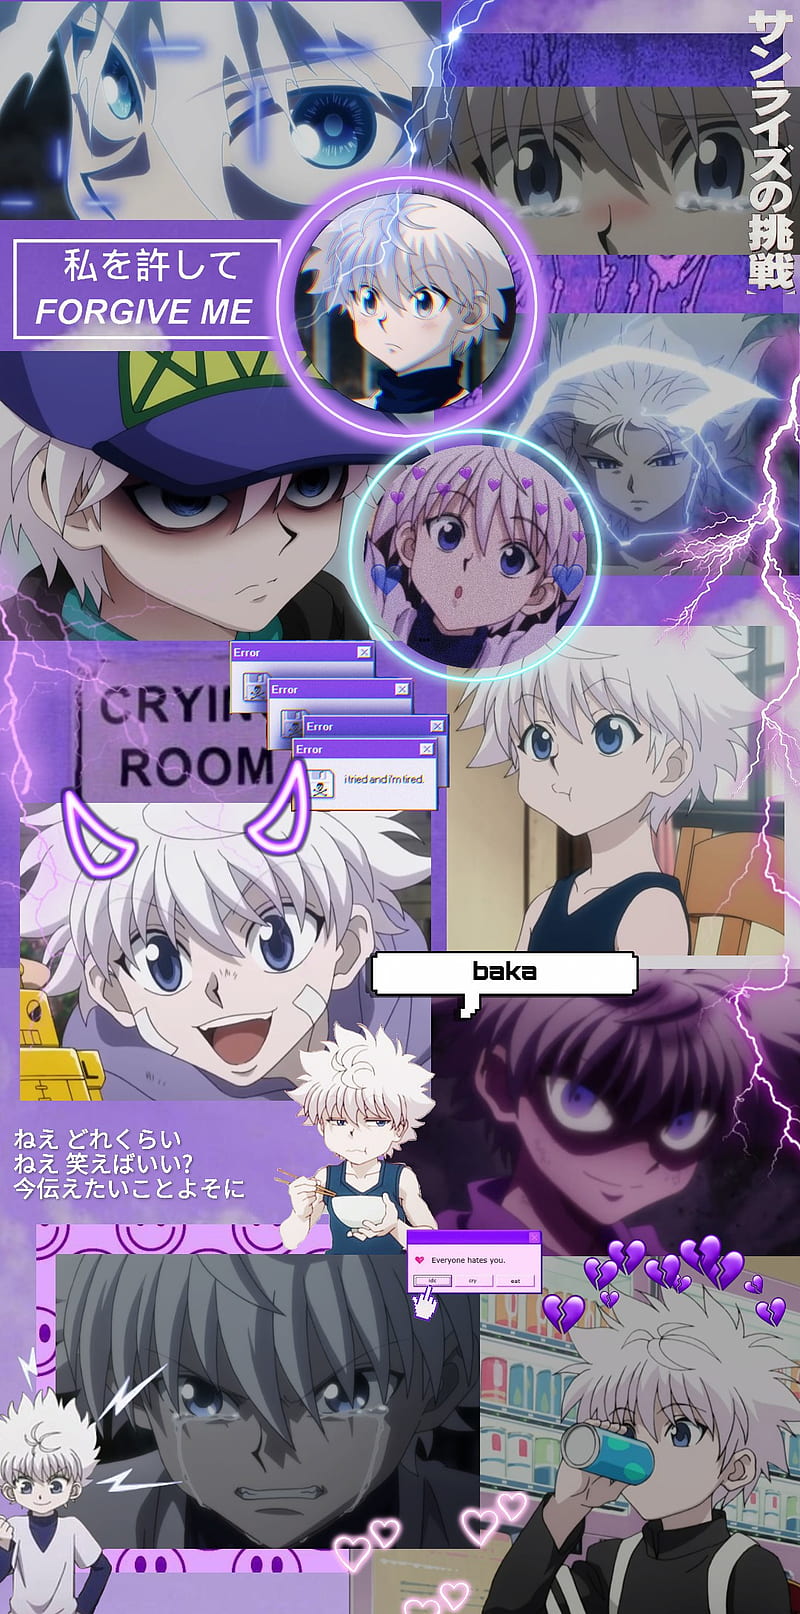 A collage of anime characters with different hair styles - Killua